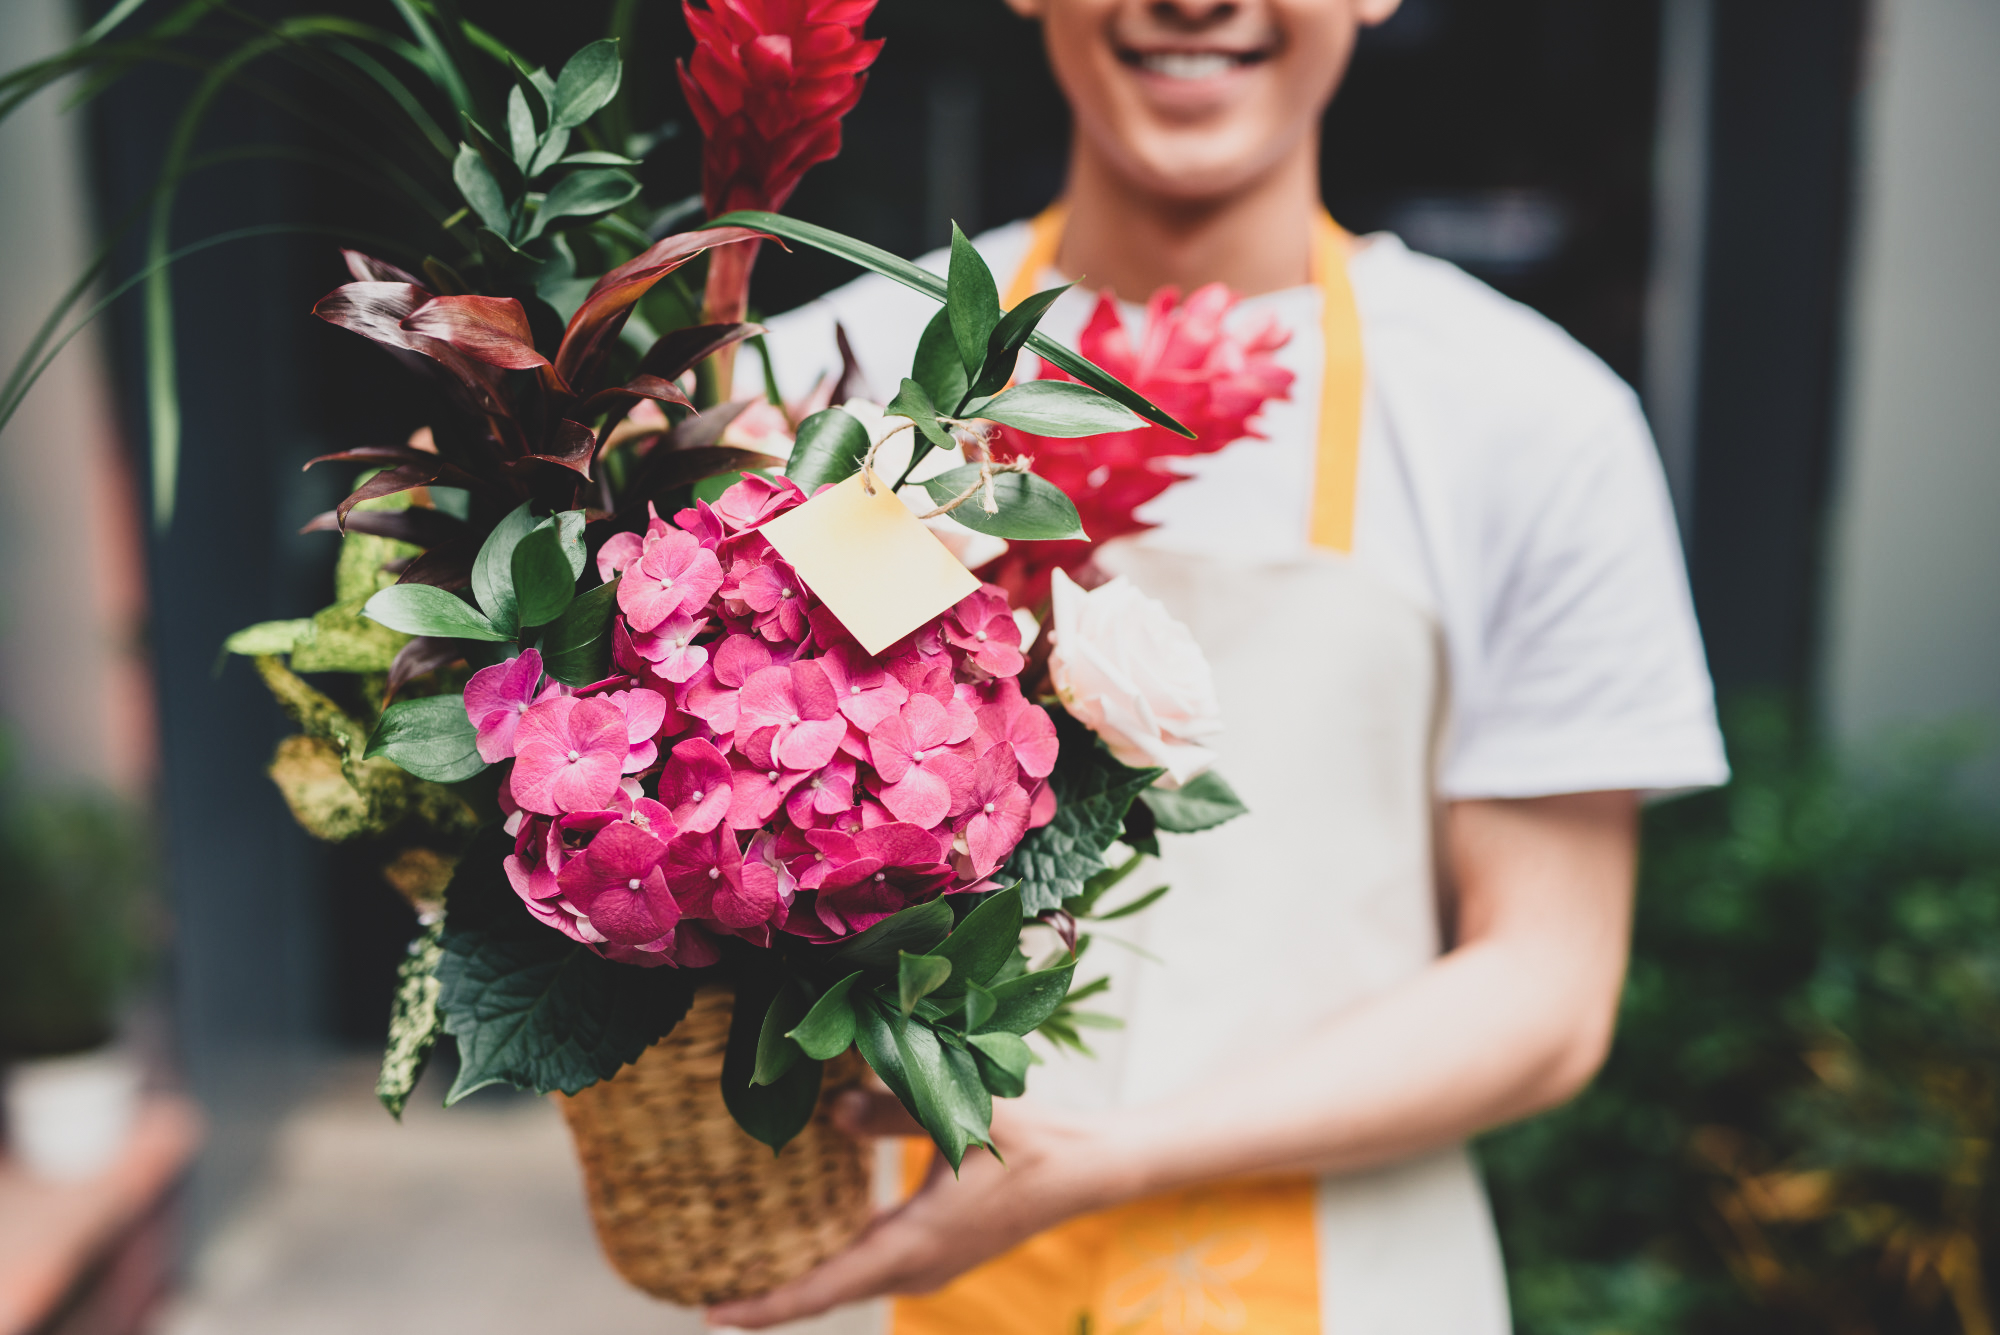 How To Keep Flowers Fresh Until Delivery 4 Tips For Florists